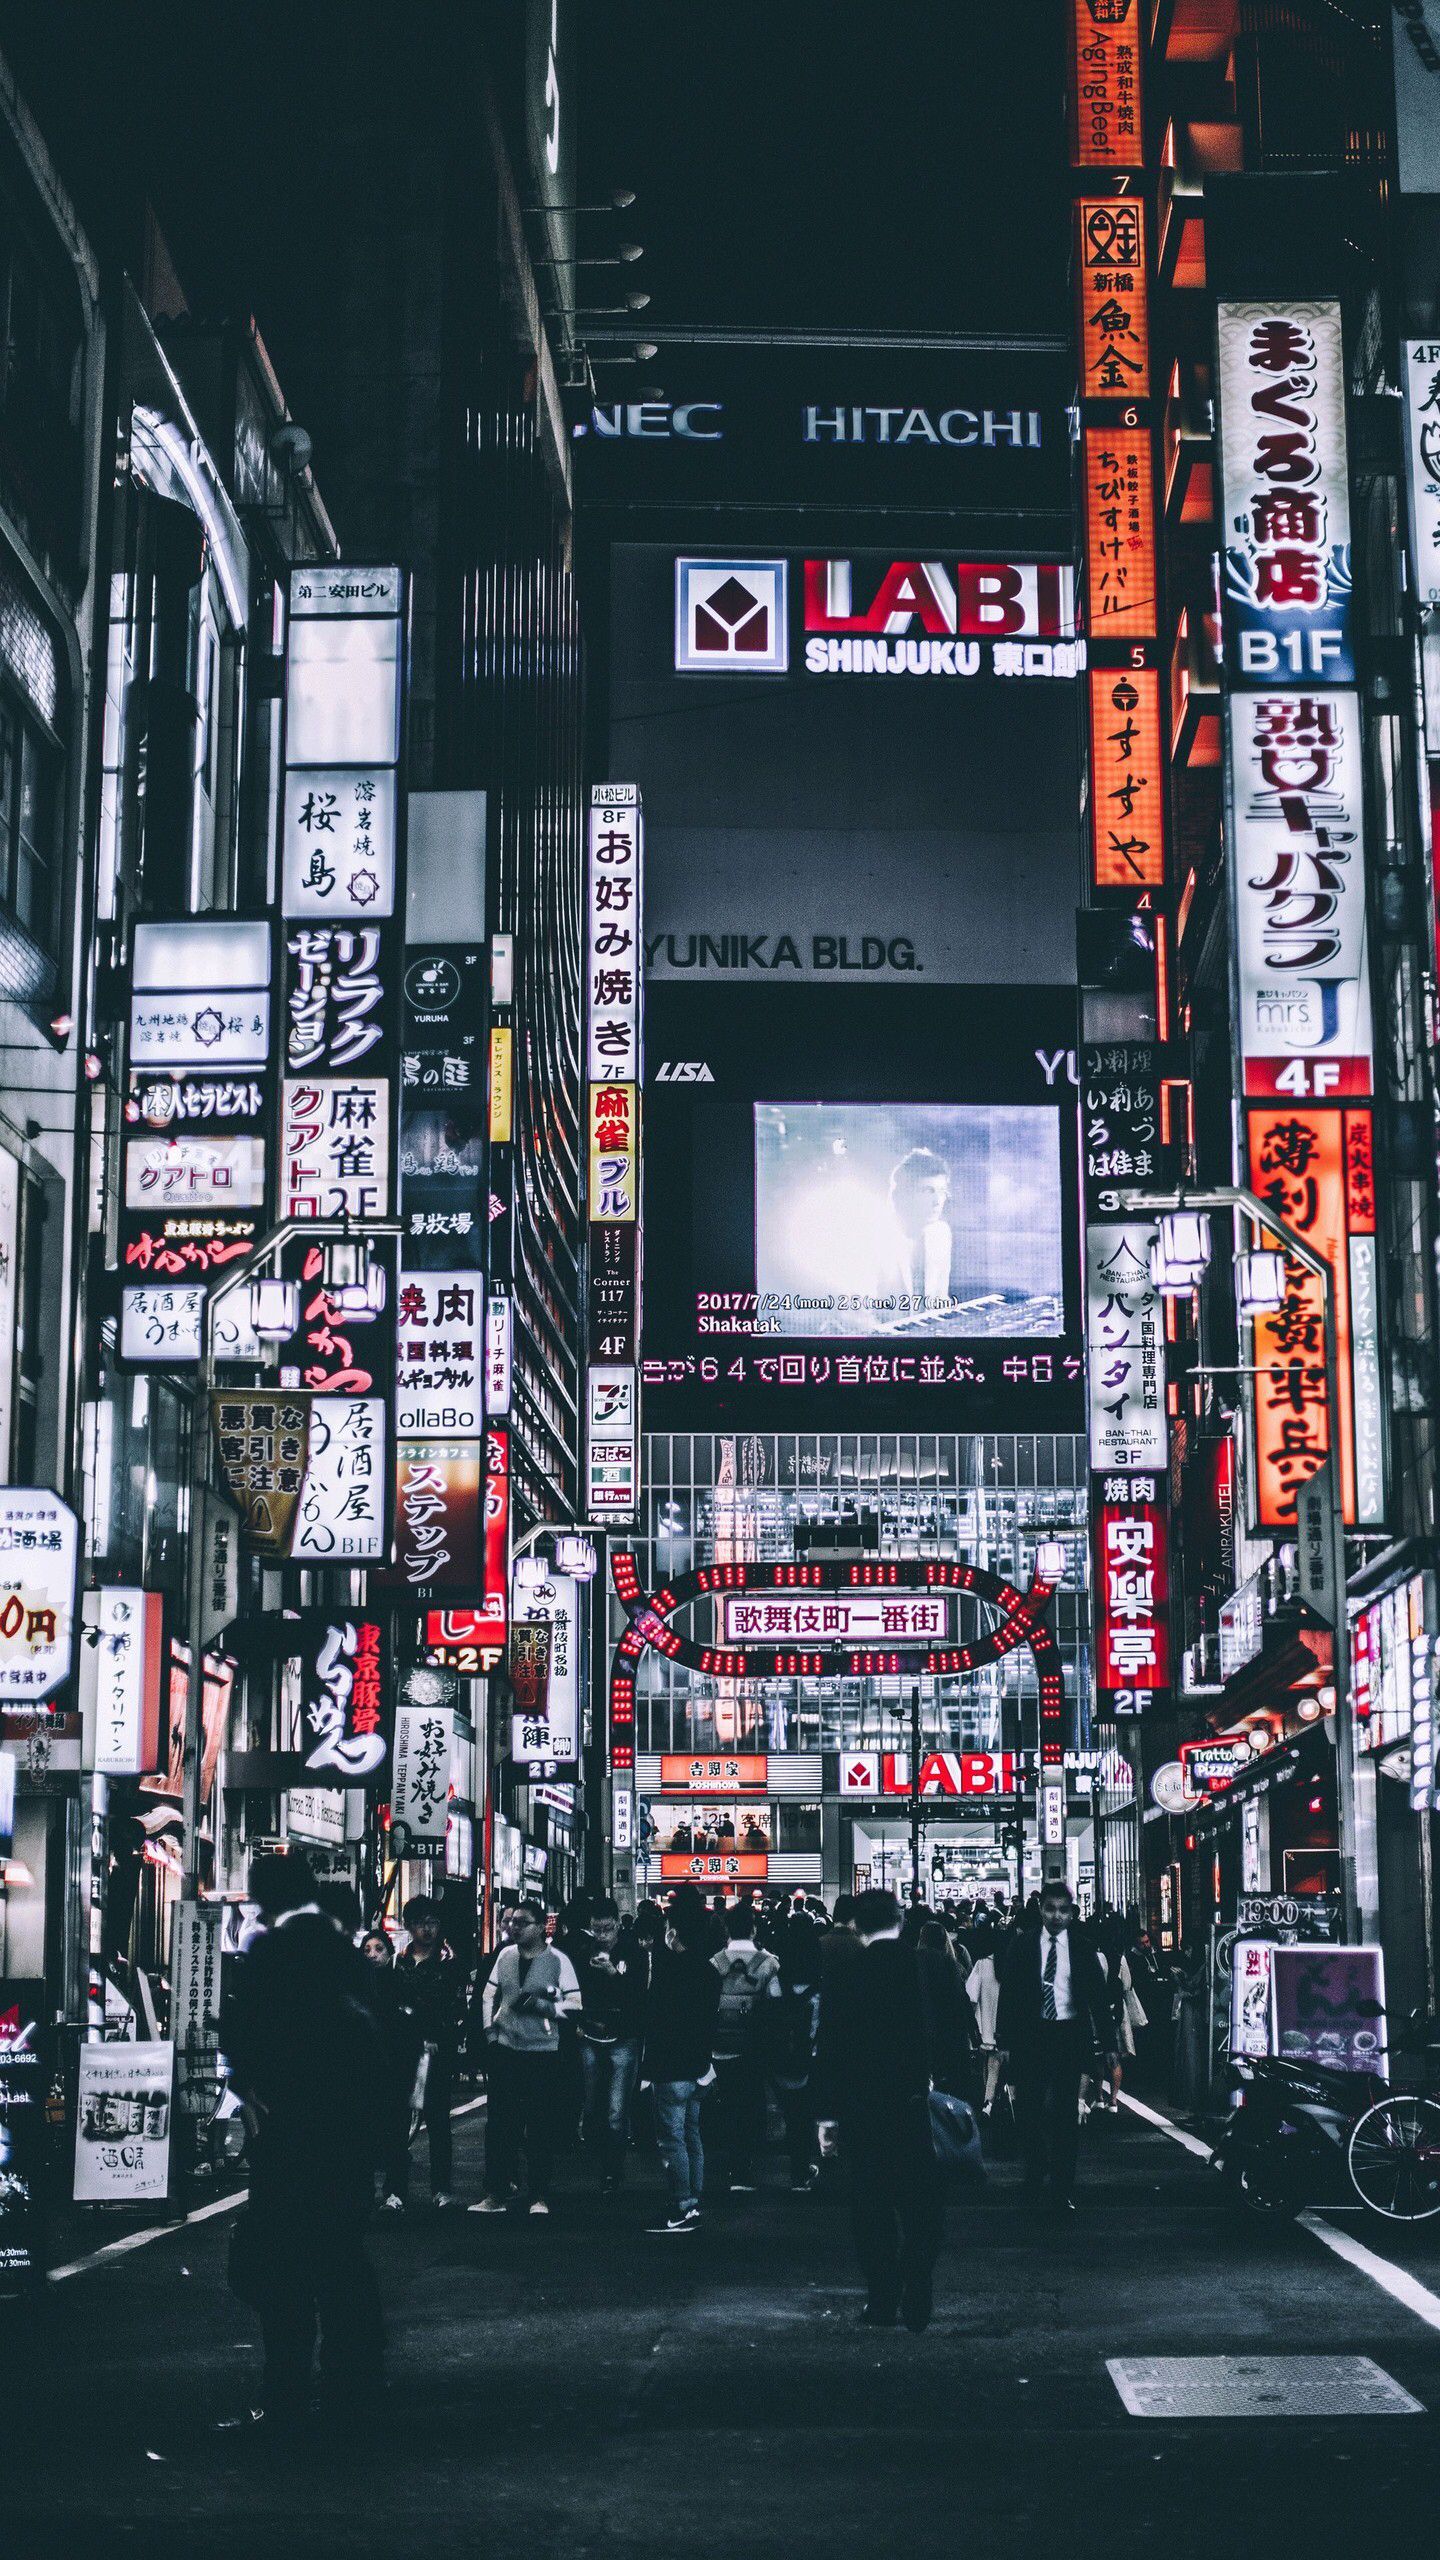 Photo “city night” by Amanda #OGQ. City iphone wallpaper, Tokyo picture, City wallpaper